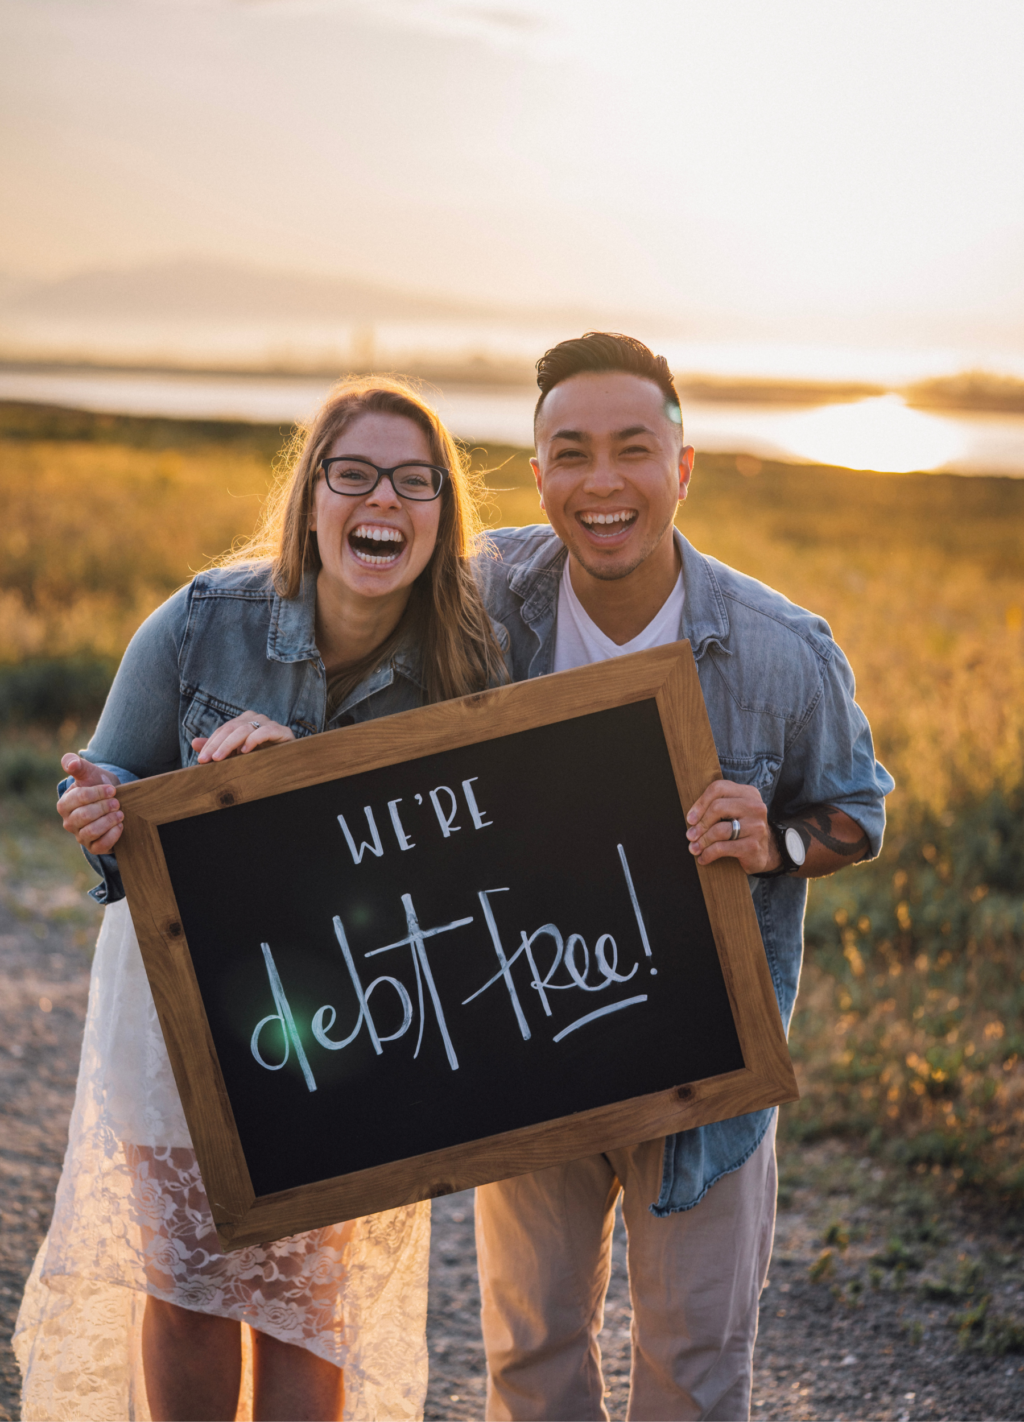 A married couple holding a sign that say's, "we're debt free!" at sunset